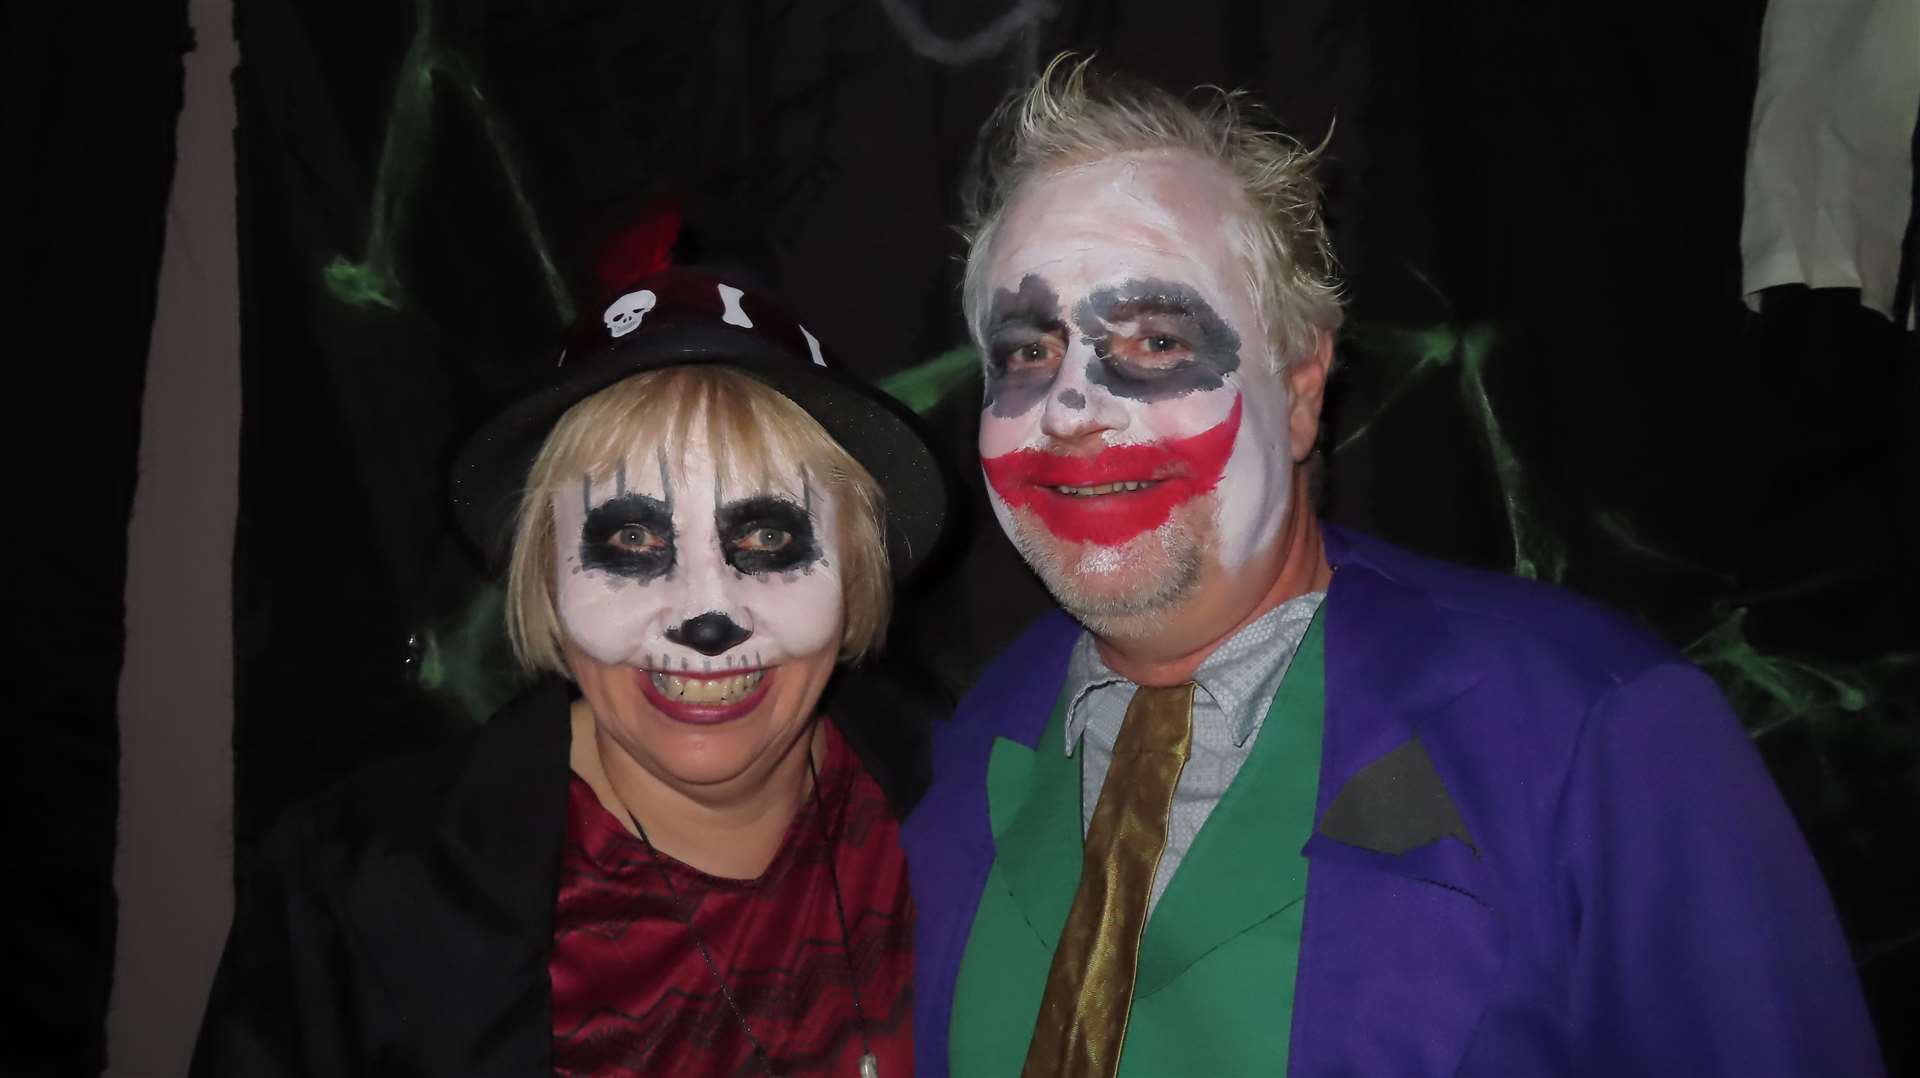 The Joker: Ashley and Tracey Smith were among those who organised the event.